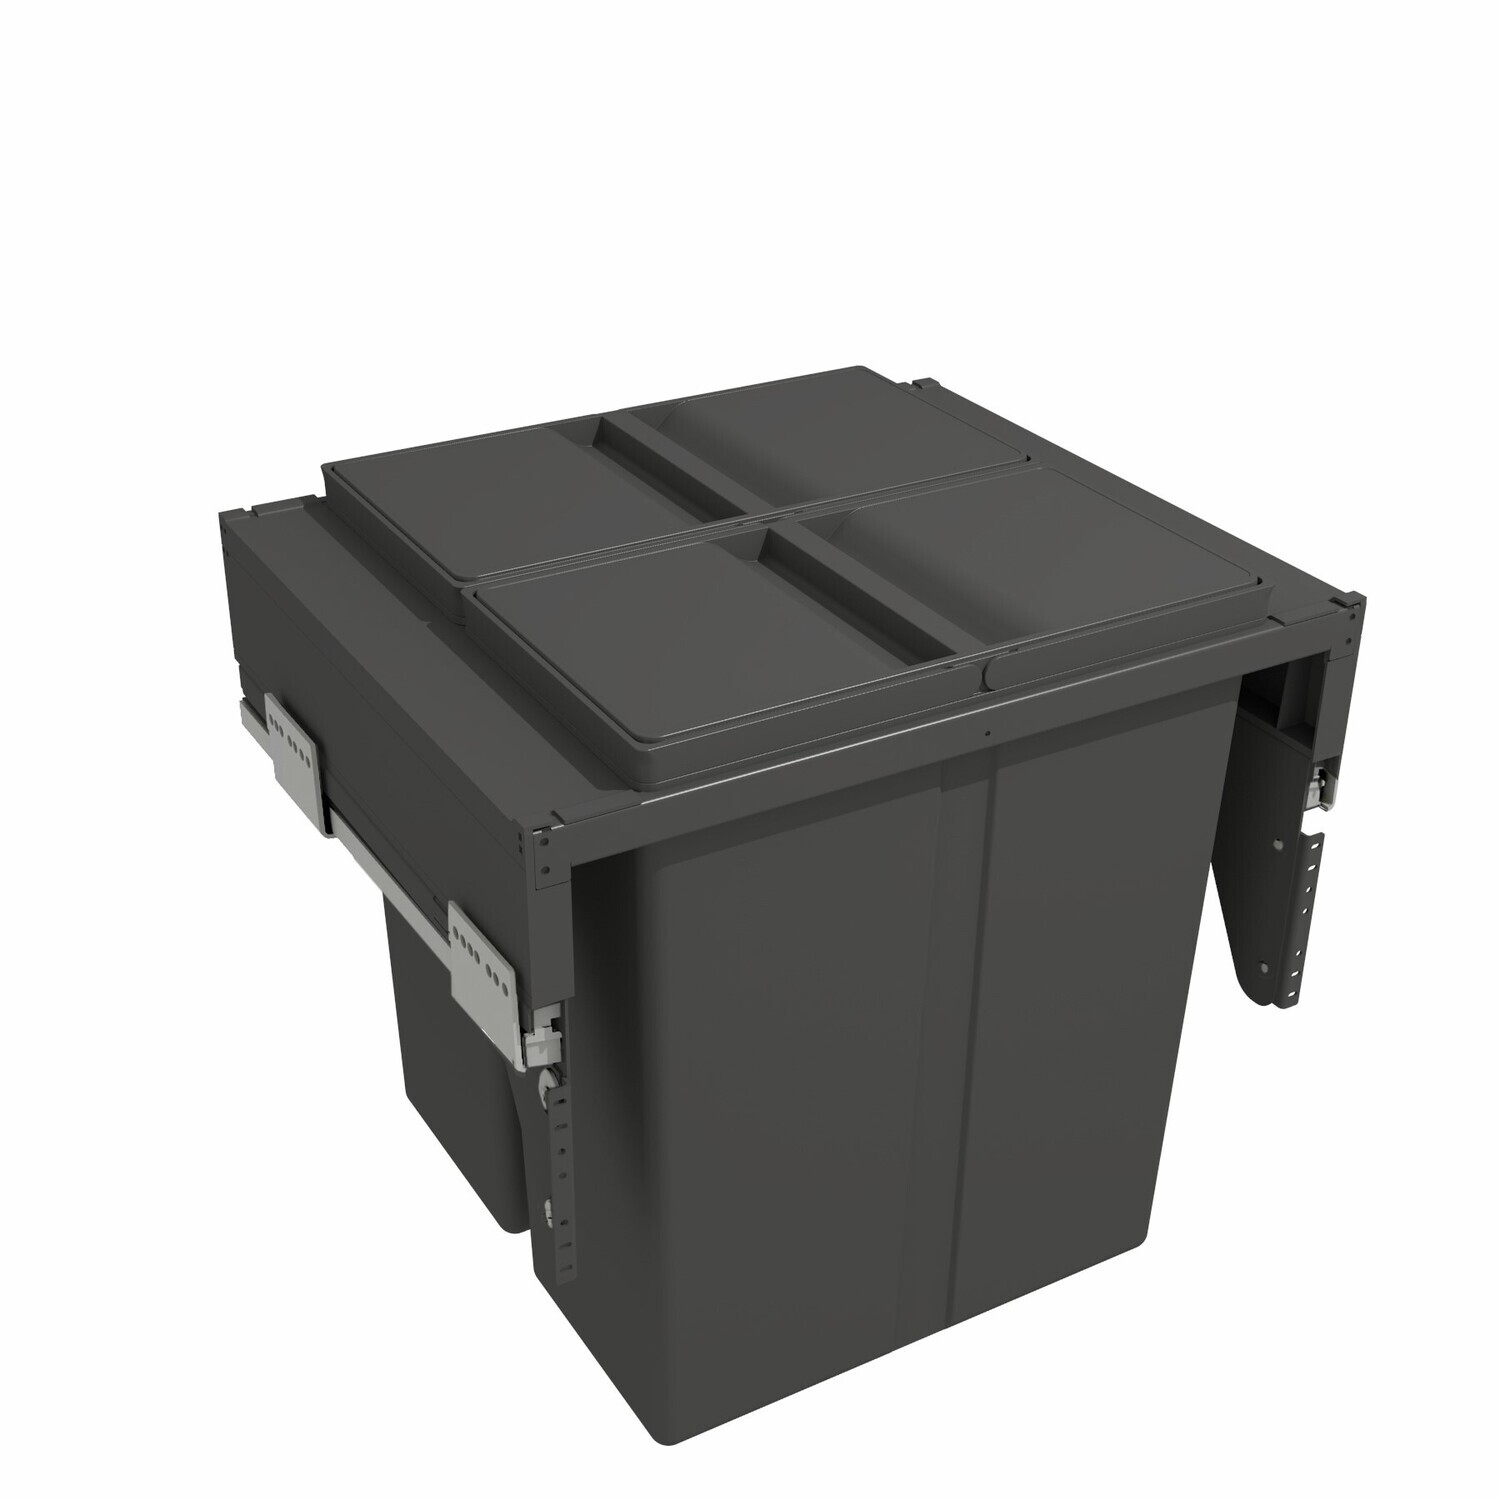 Evo 80 Litre Anthracite Bin to Suit 600mm Cabinet.